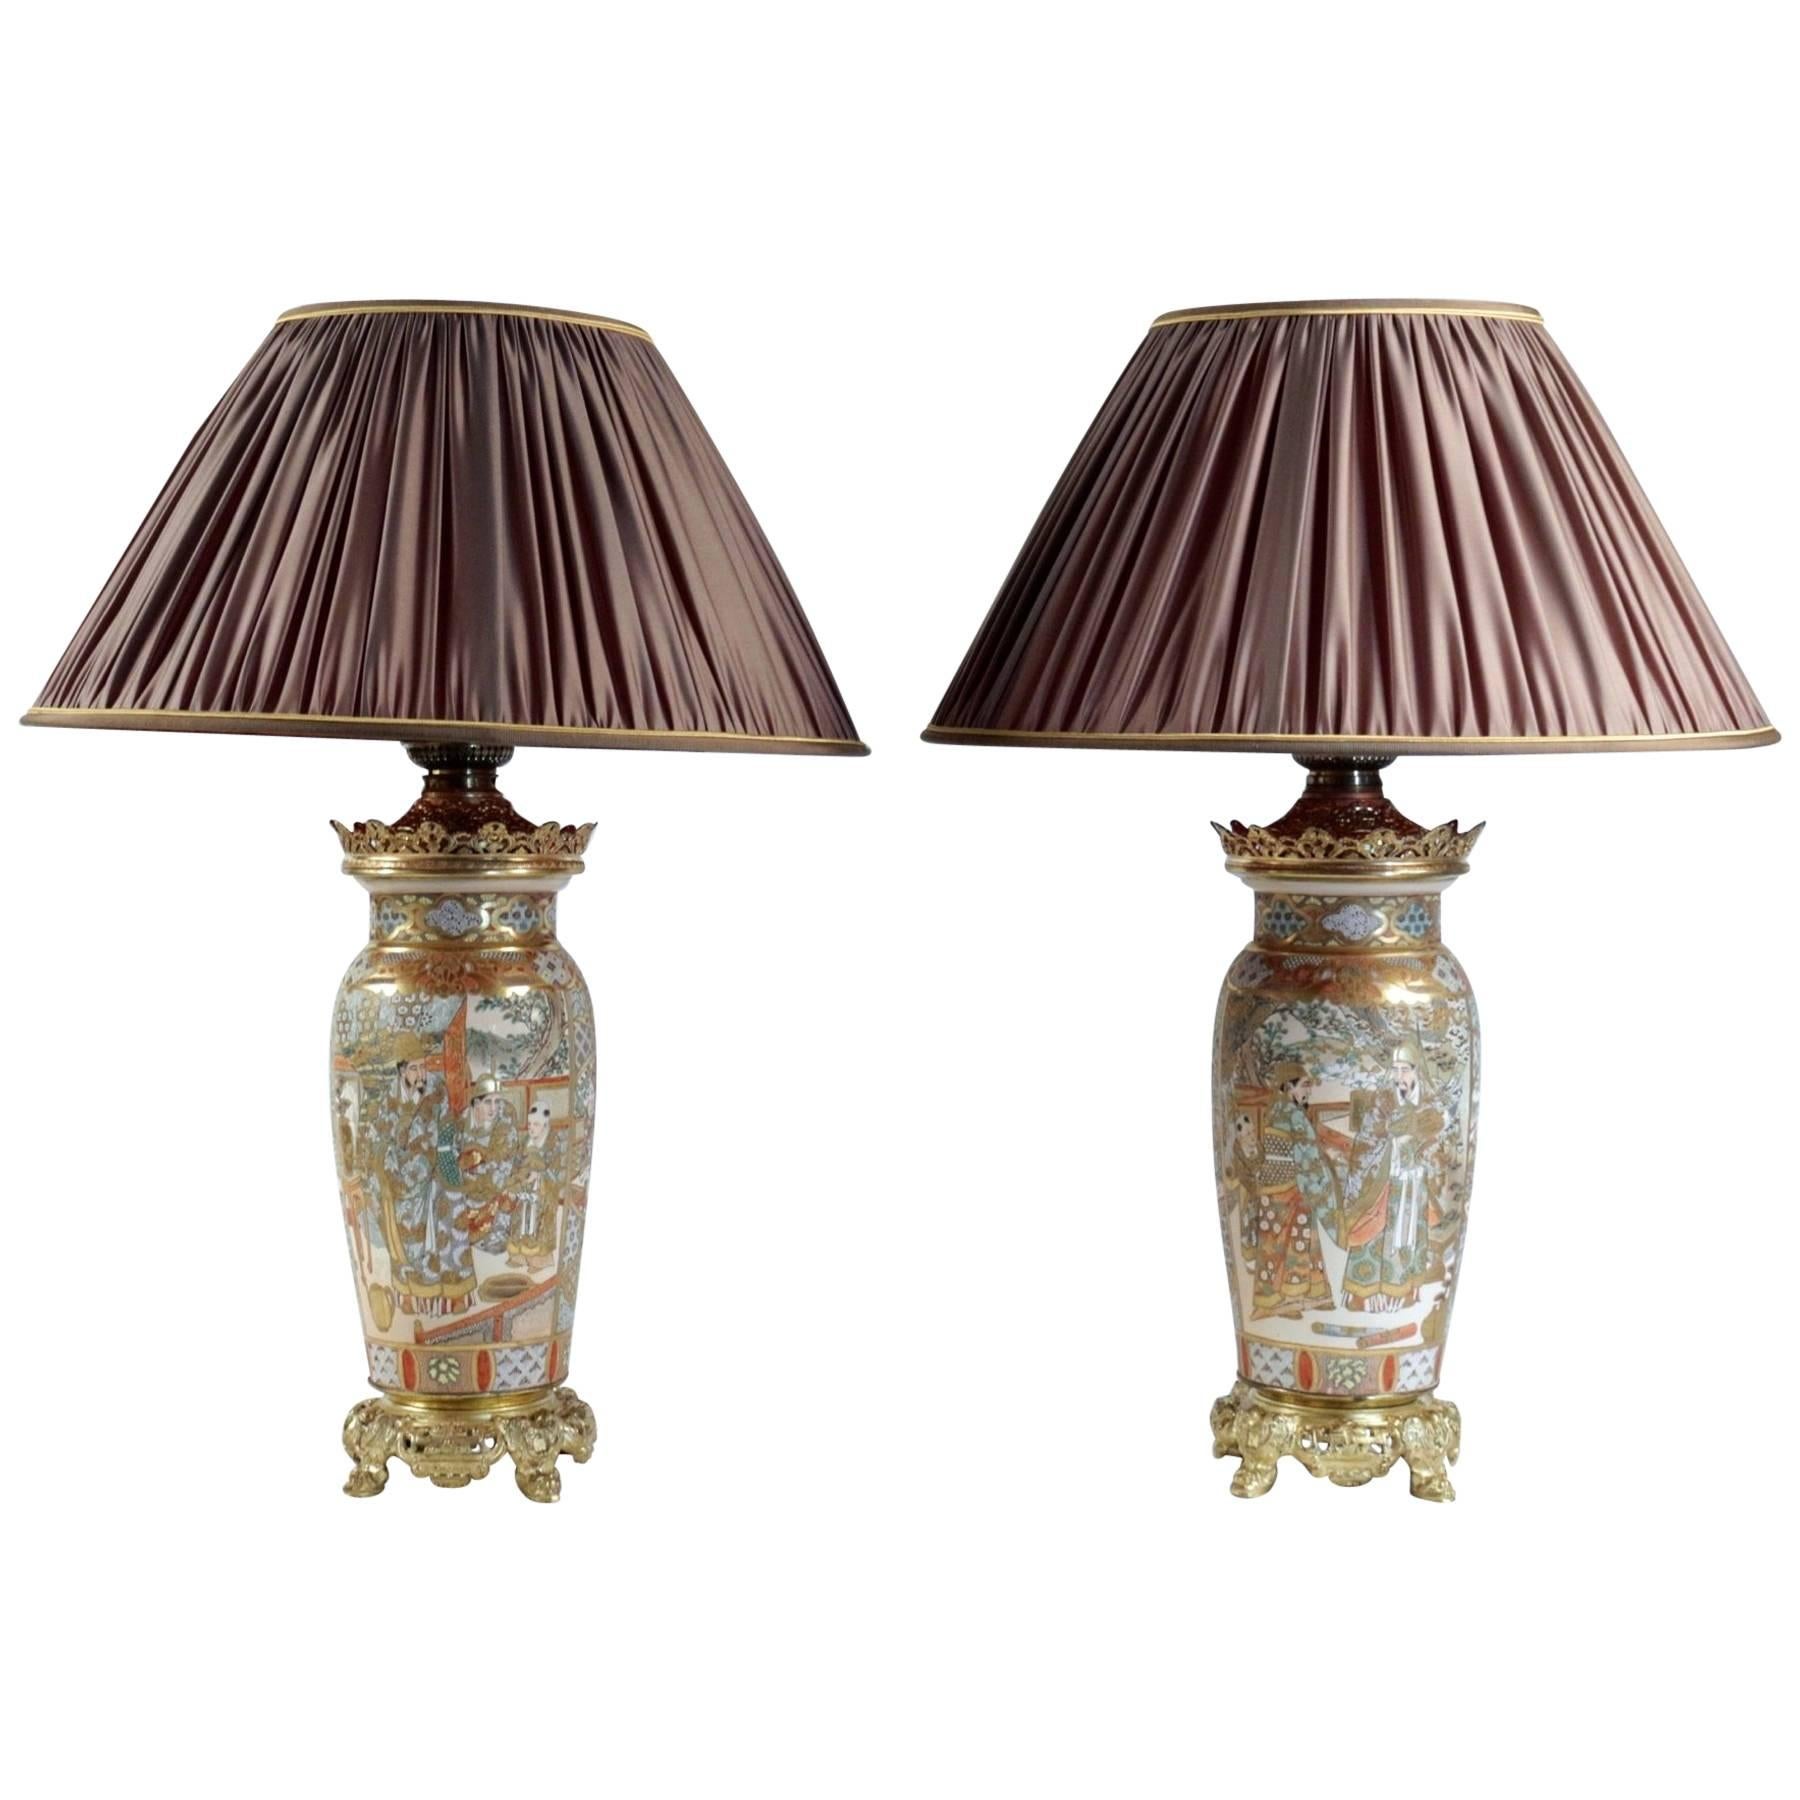 Pair of High Satsuma Fine Faience Lamps, 1880 Period